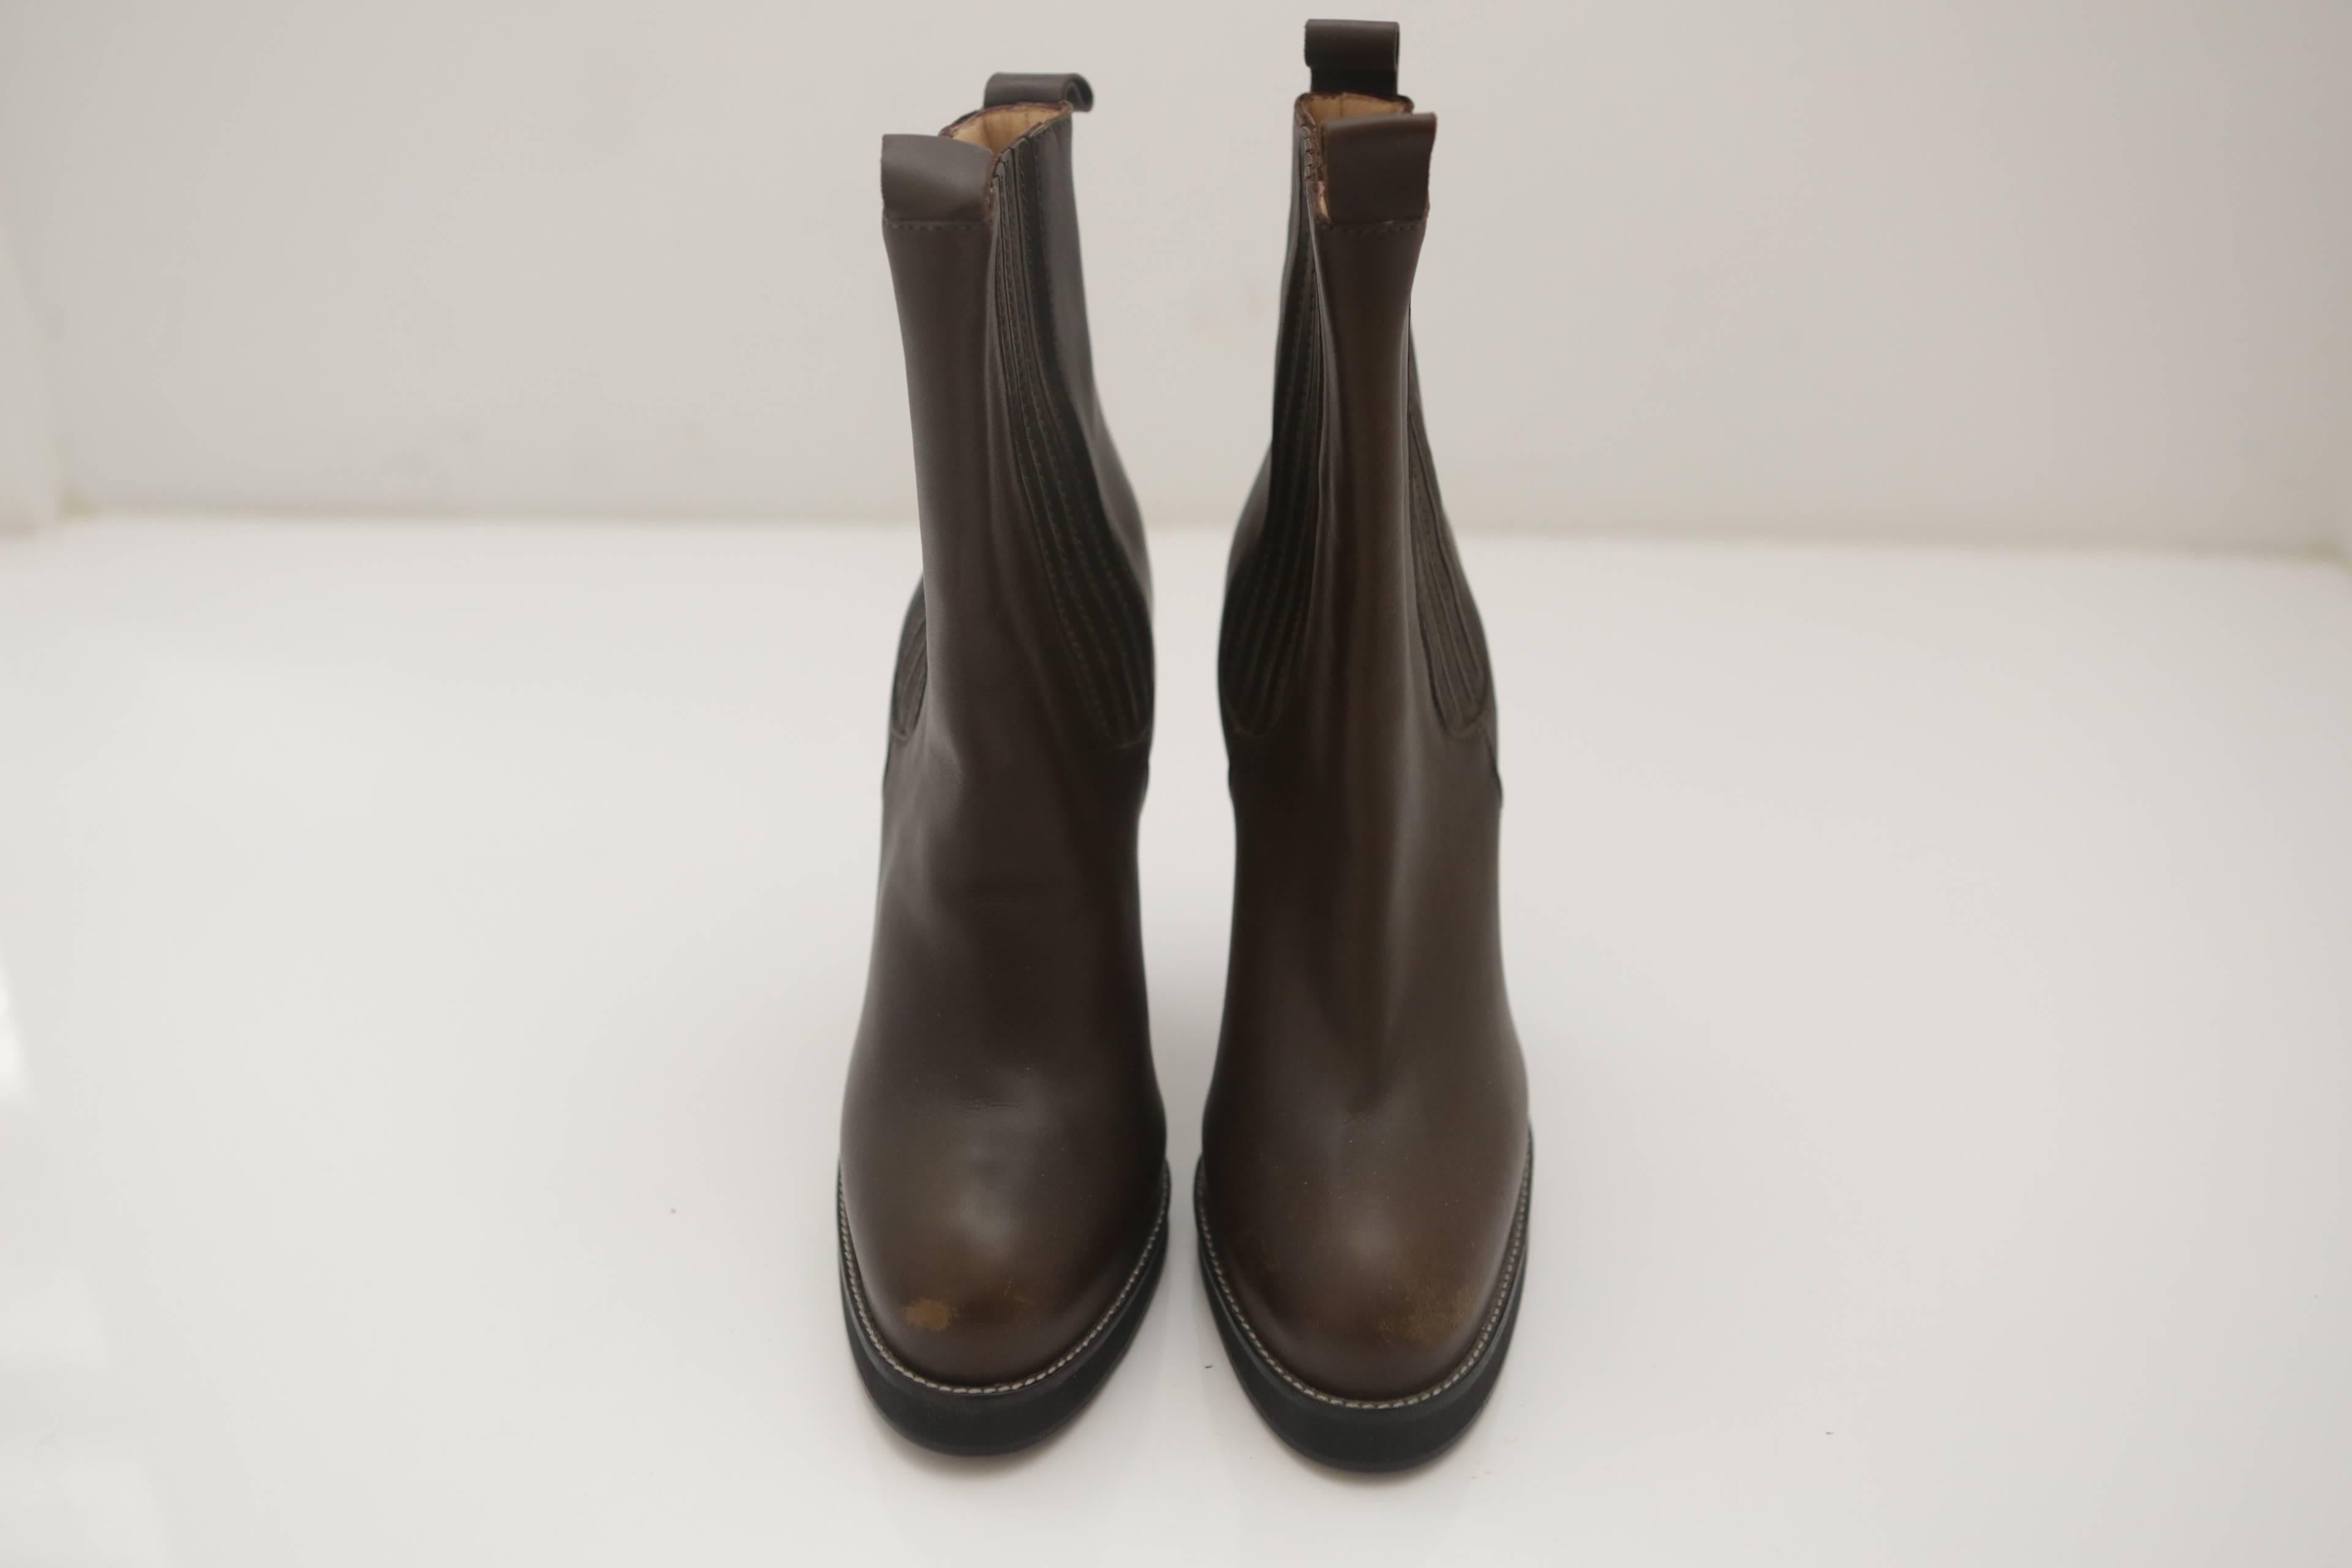 Balenciaga Ankle Boots with double pull strap at front and back in brown leather. Features detailed U-paneled stitching in tunnel tread on a stacked 5